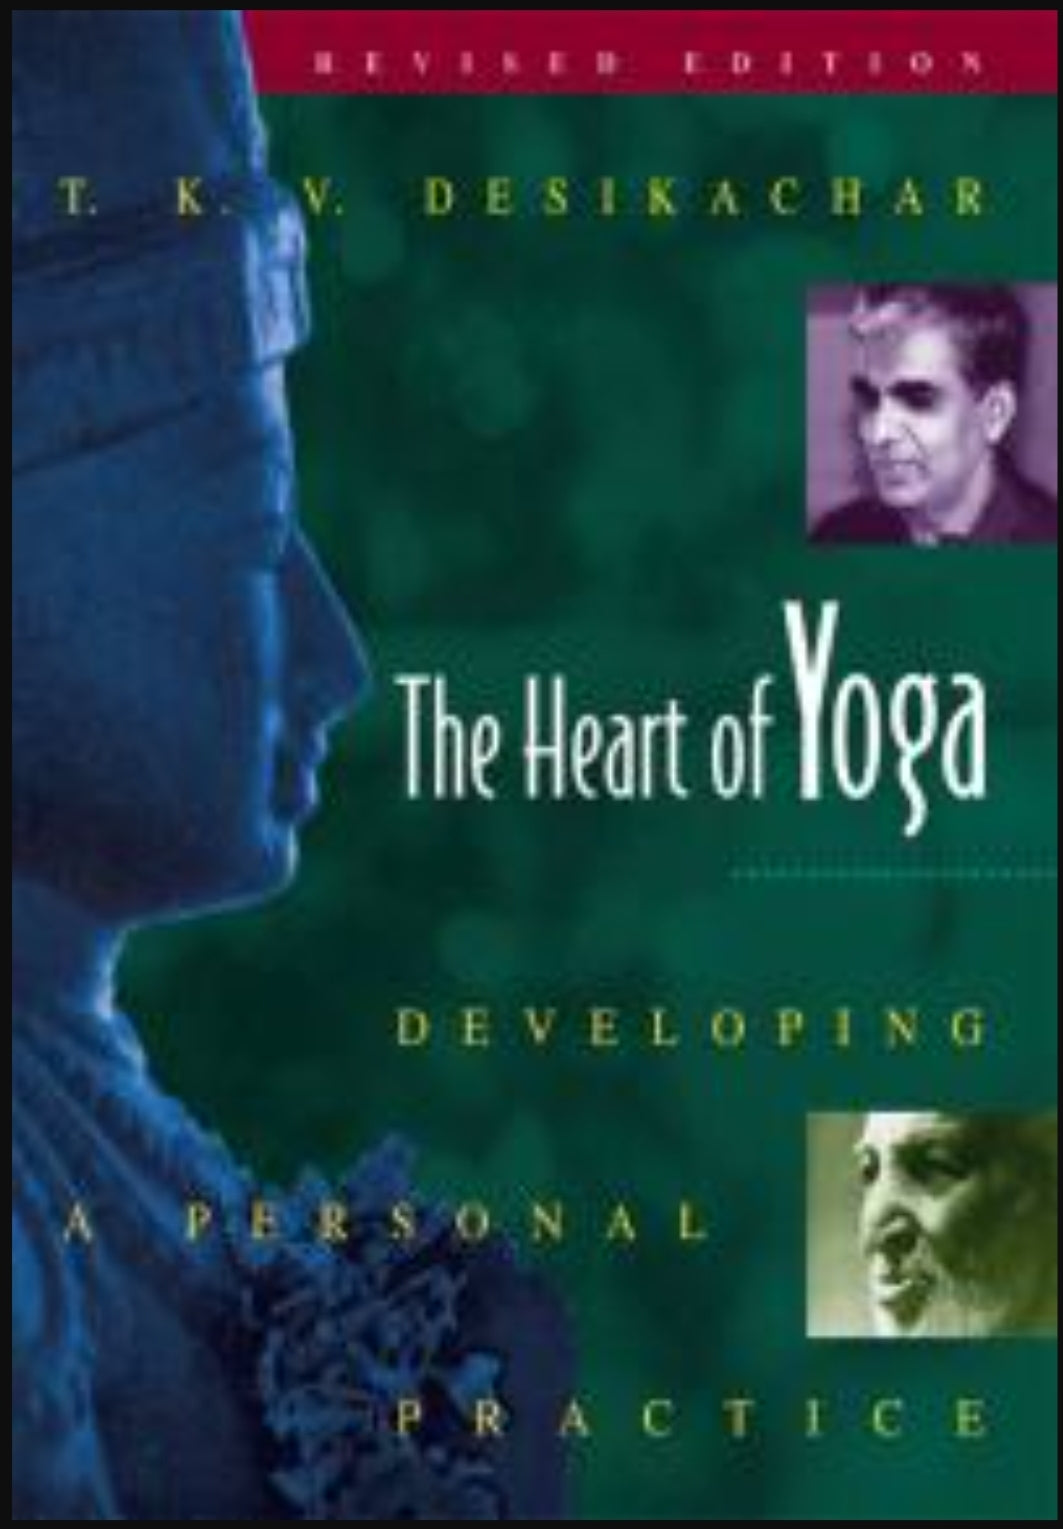 Heart of Yoga: Developing a Personal Practice by Desikachar